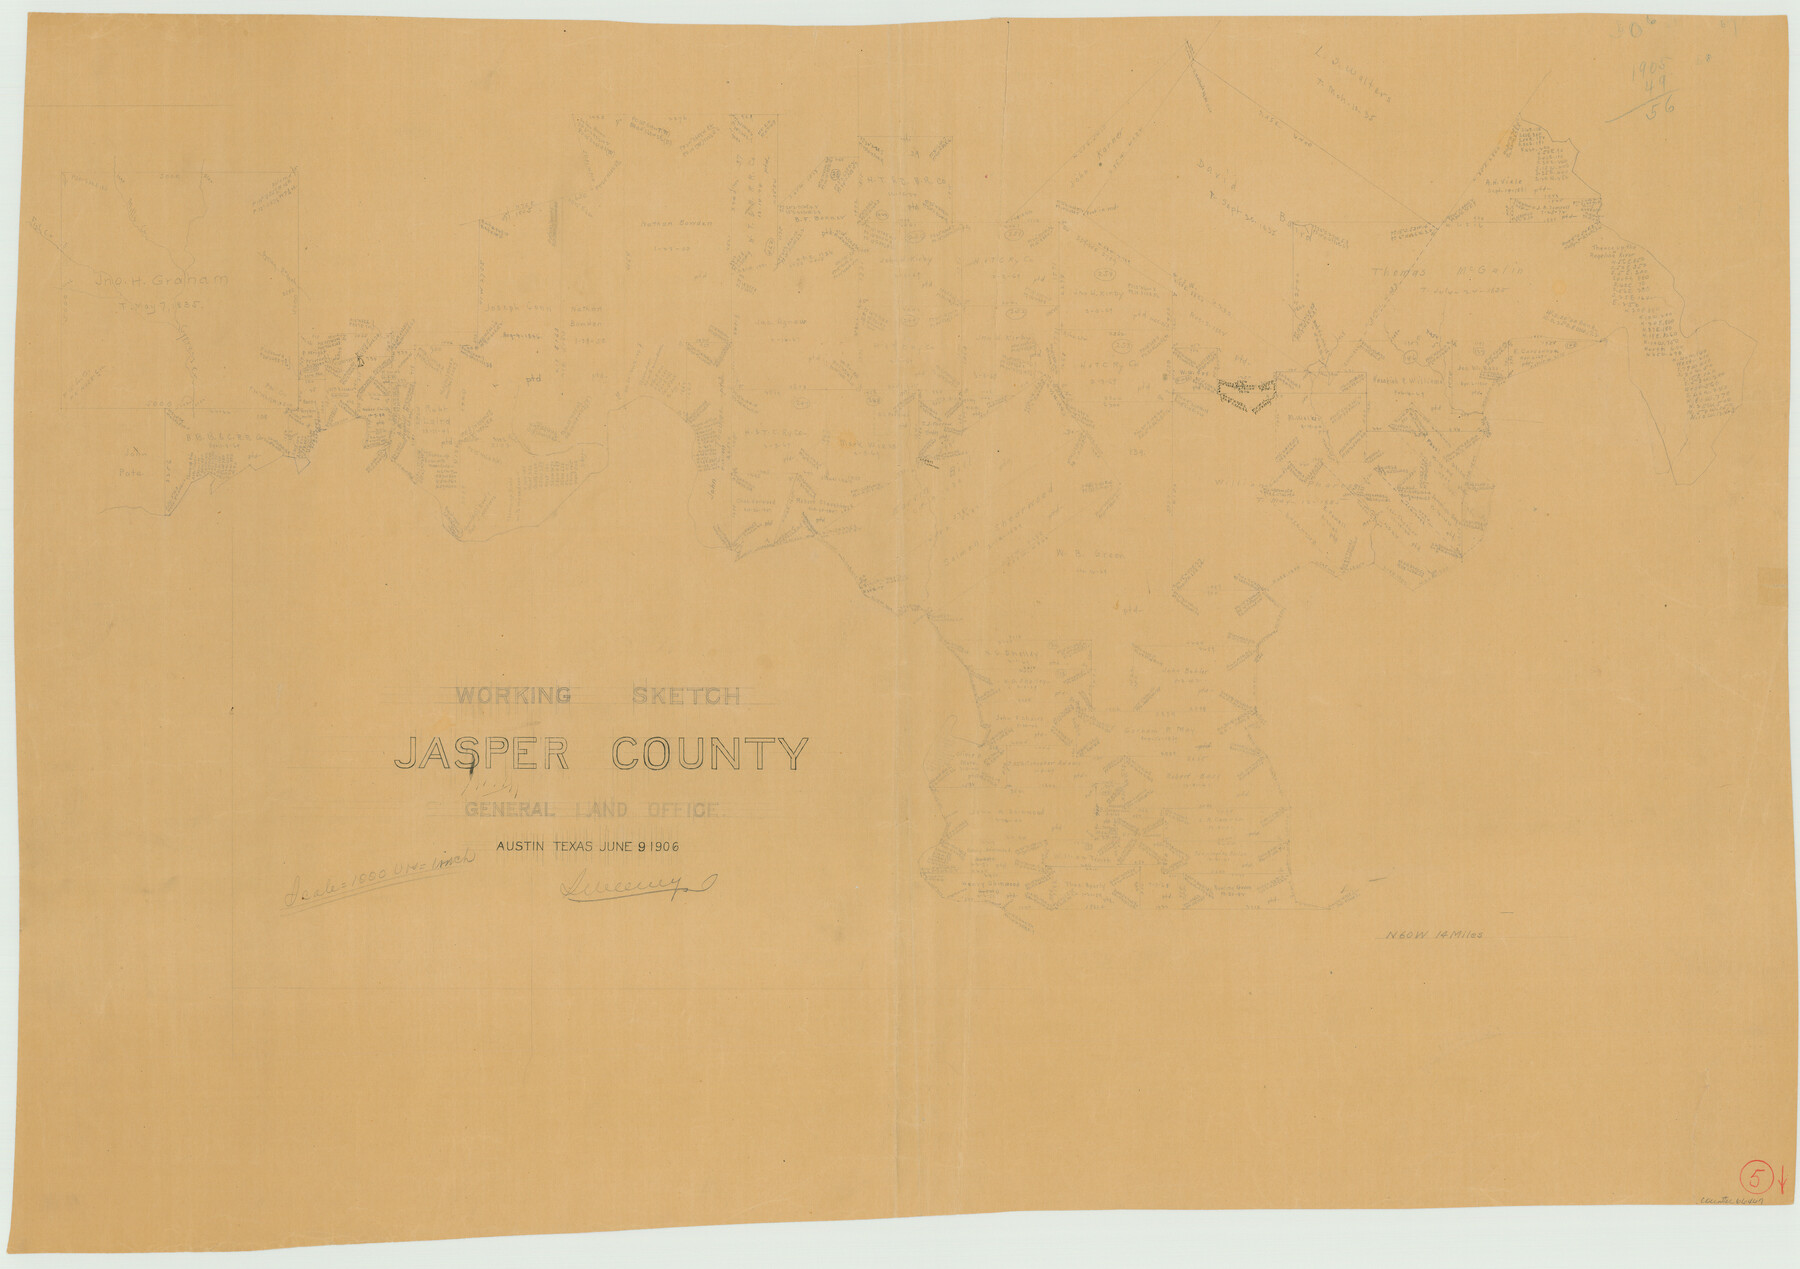 66467, Jasper County Working Sketch 5, General Map Collection